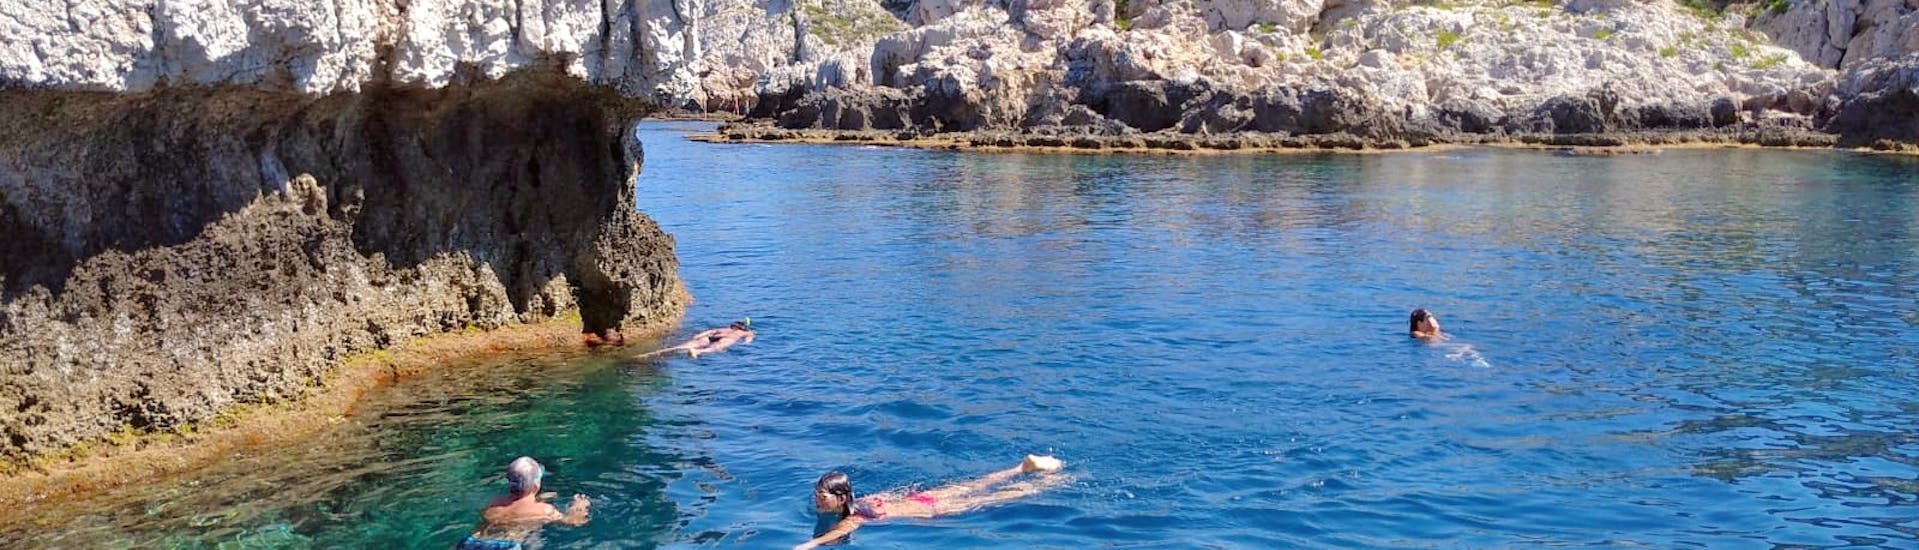 People snorkeling during Private Boat Trip to Vulcano and Lipari from Milazzo with Snorkeling with Milazzo Coast to Coast.